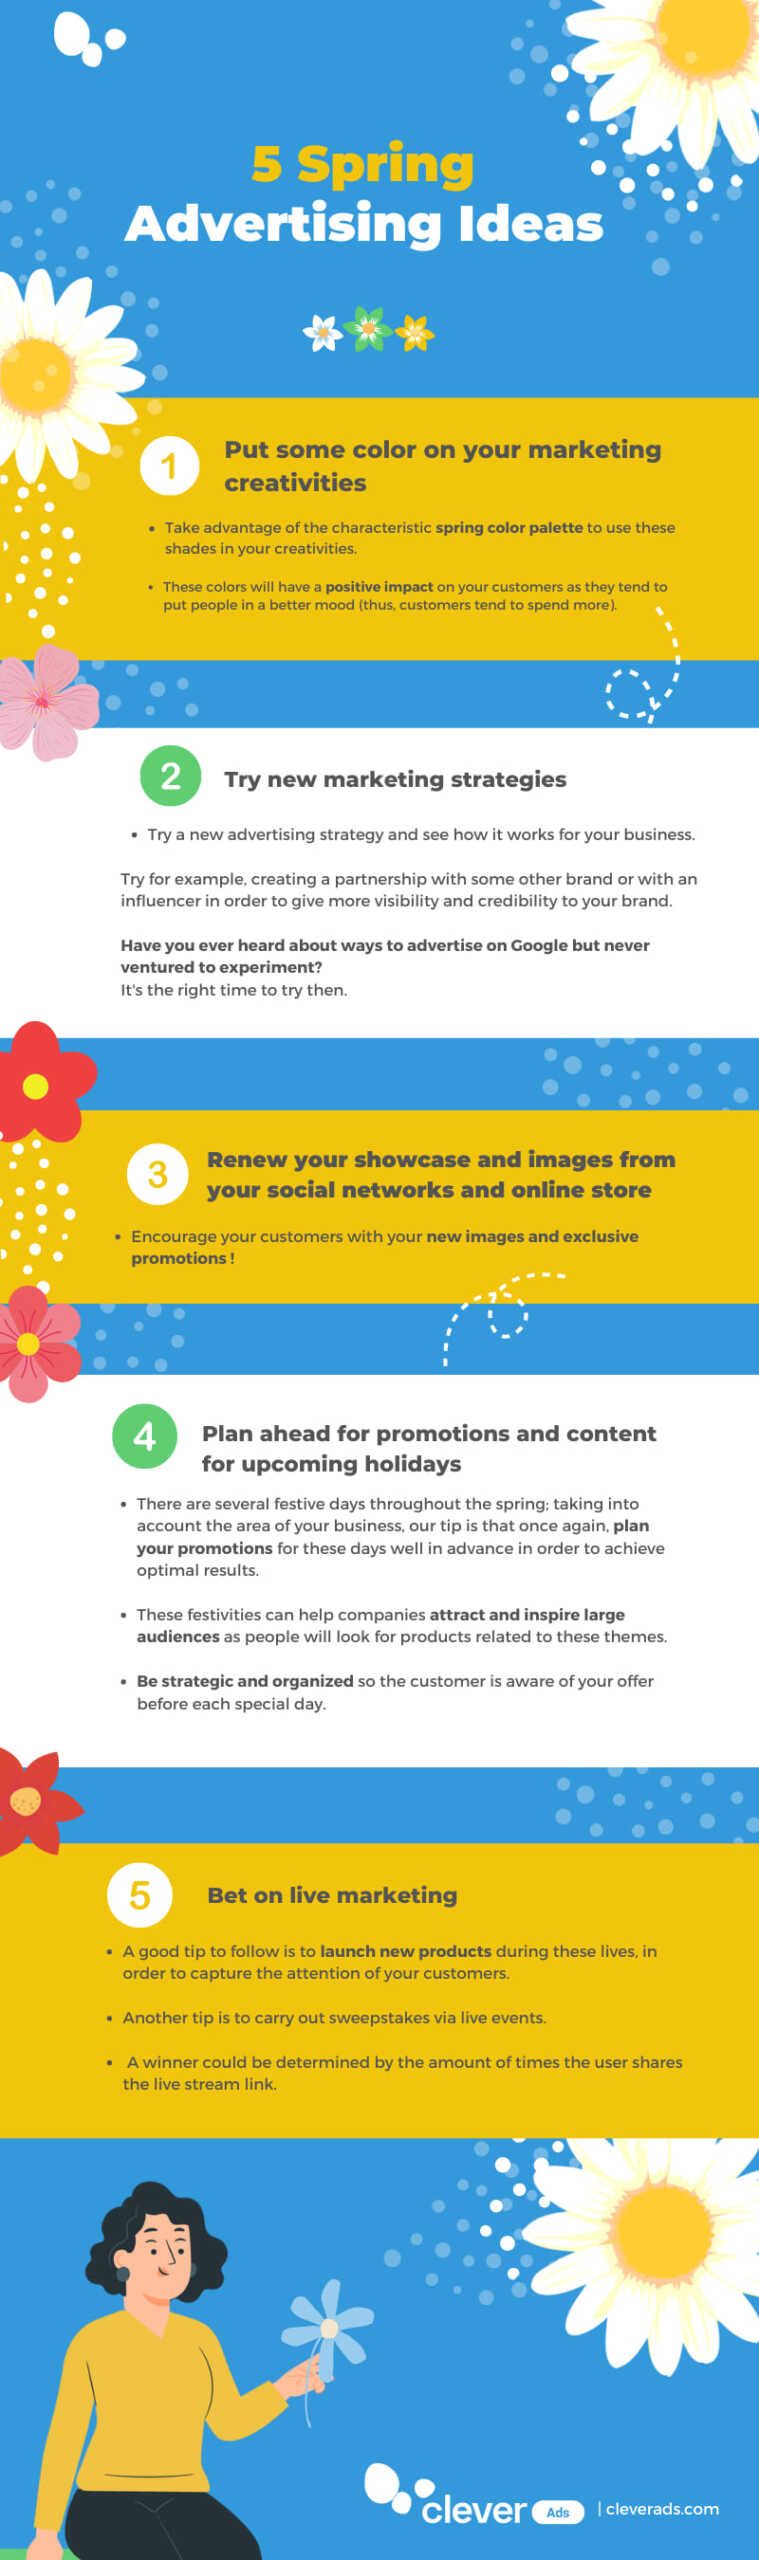 spring advertising ideas infographic